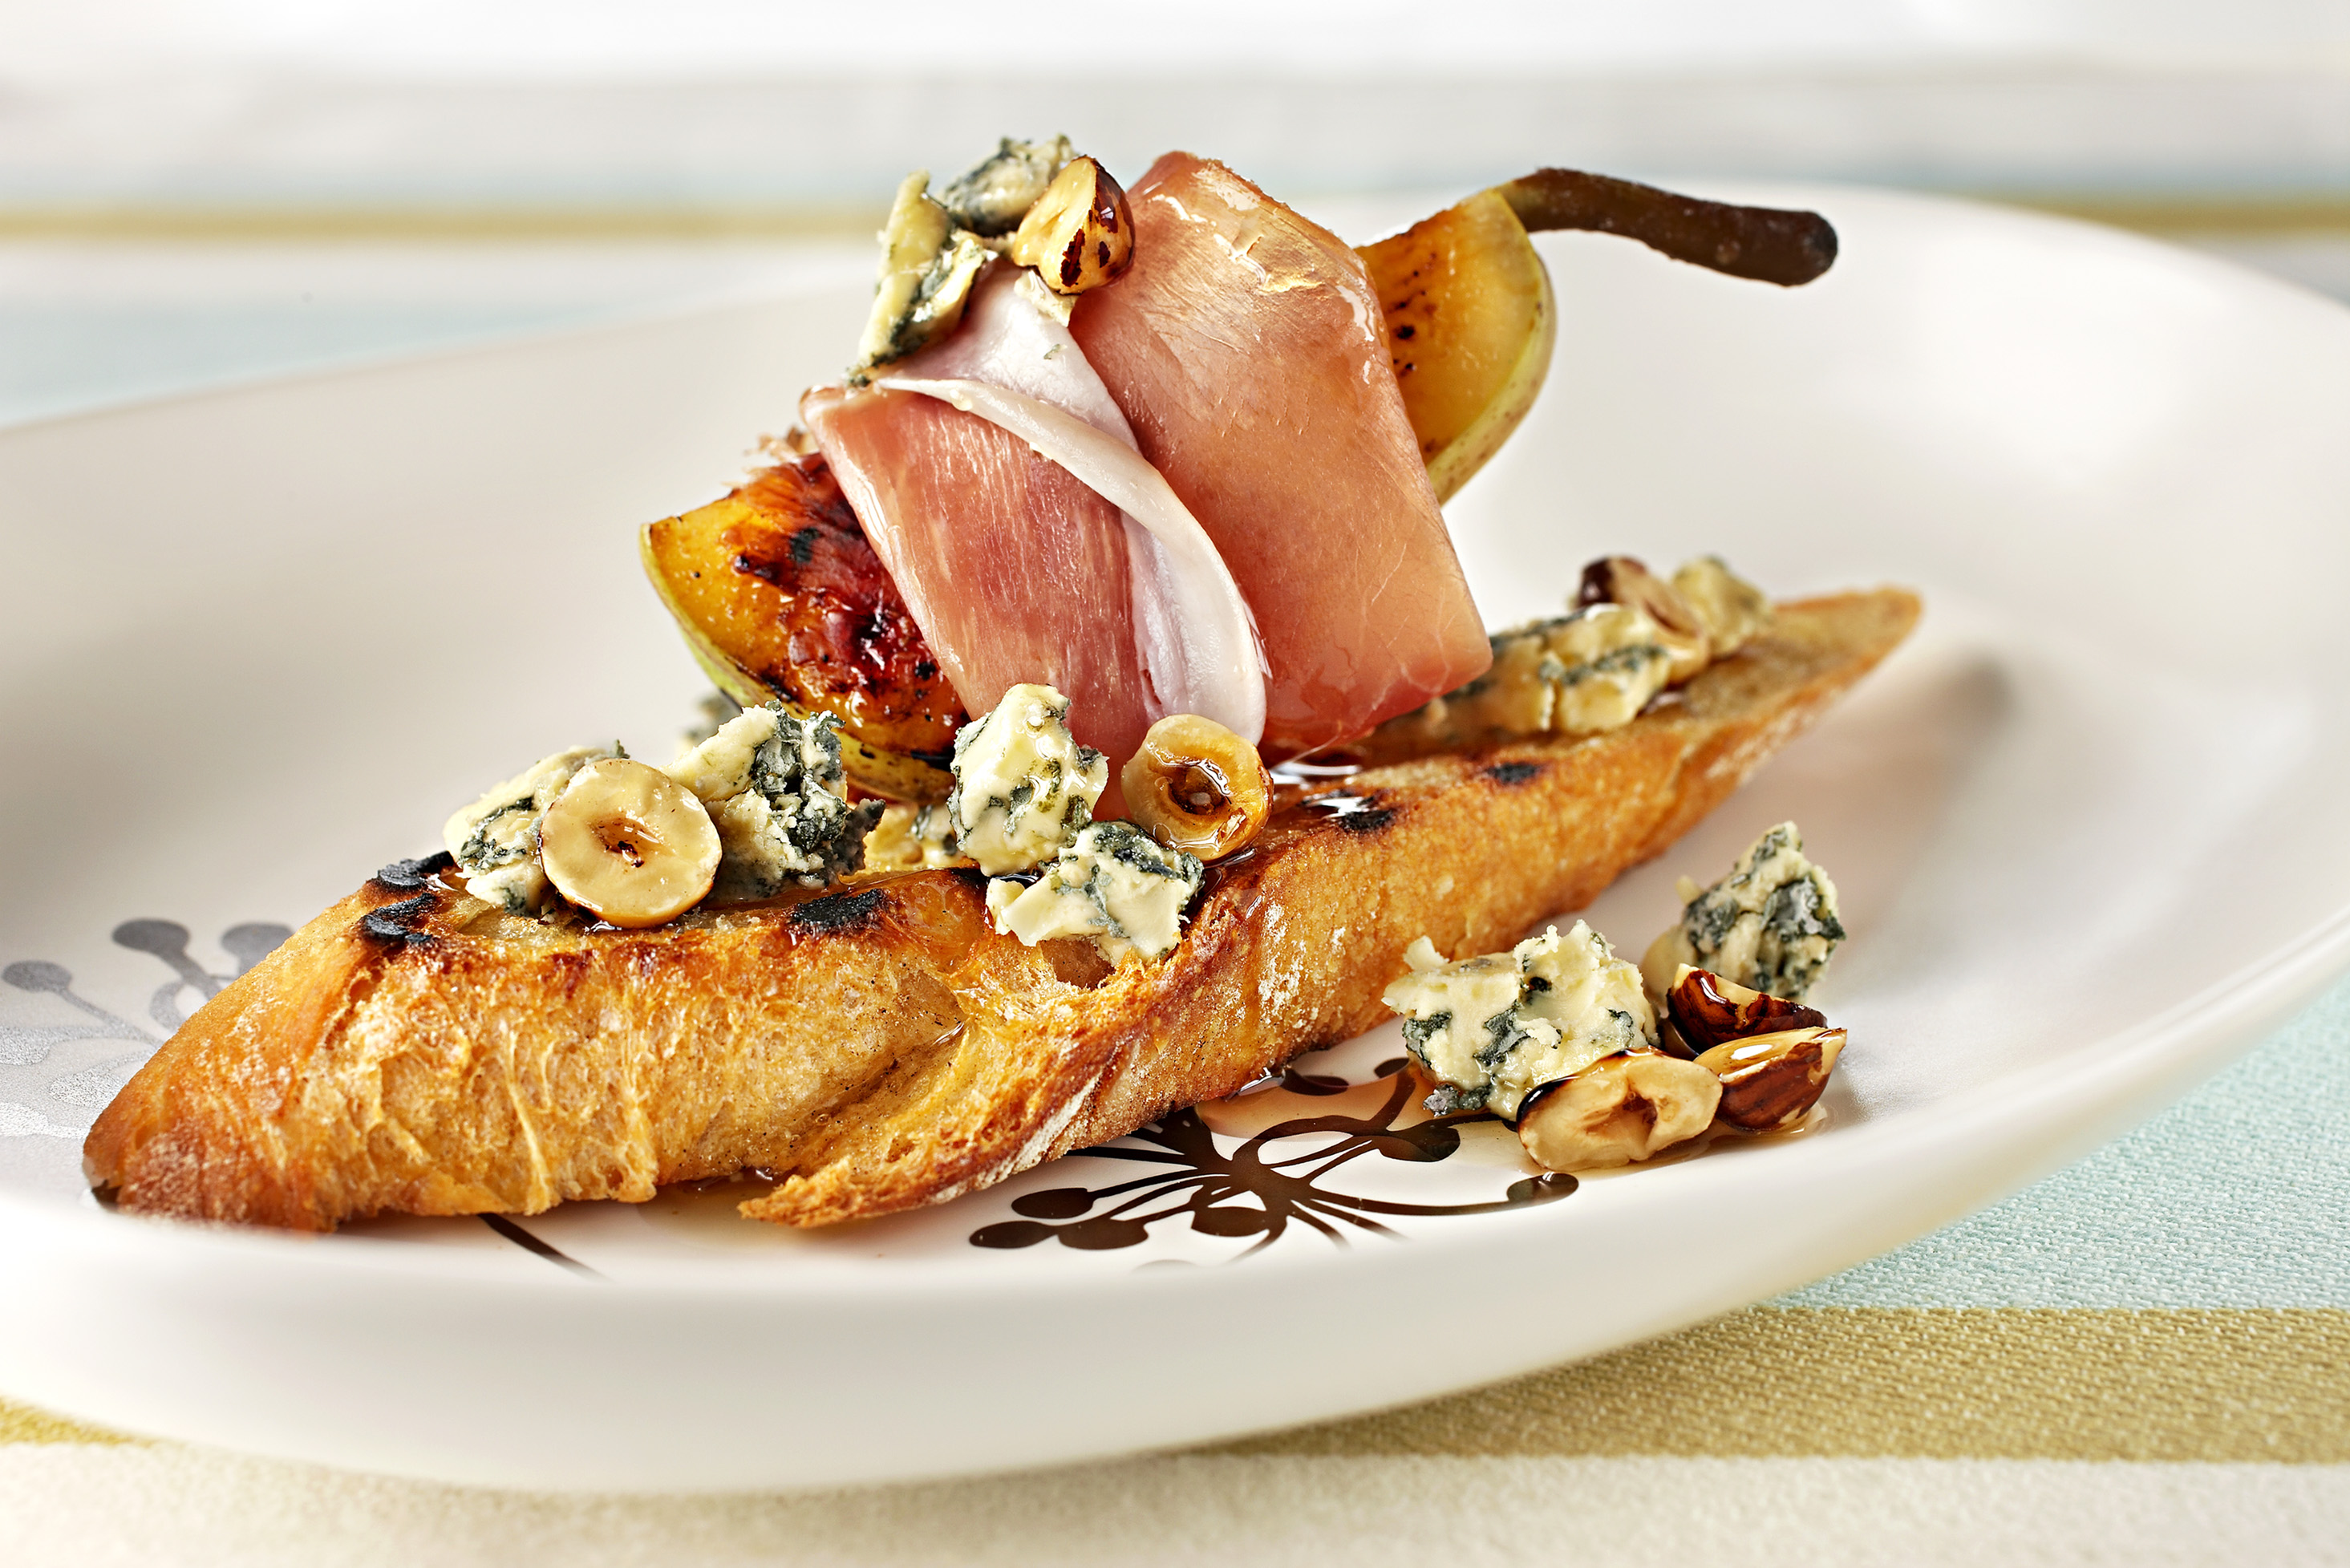 Char-grilled Pear, Prosciutto and Blue with Honeyed Hazelnuts